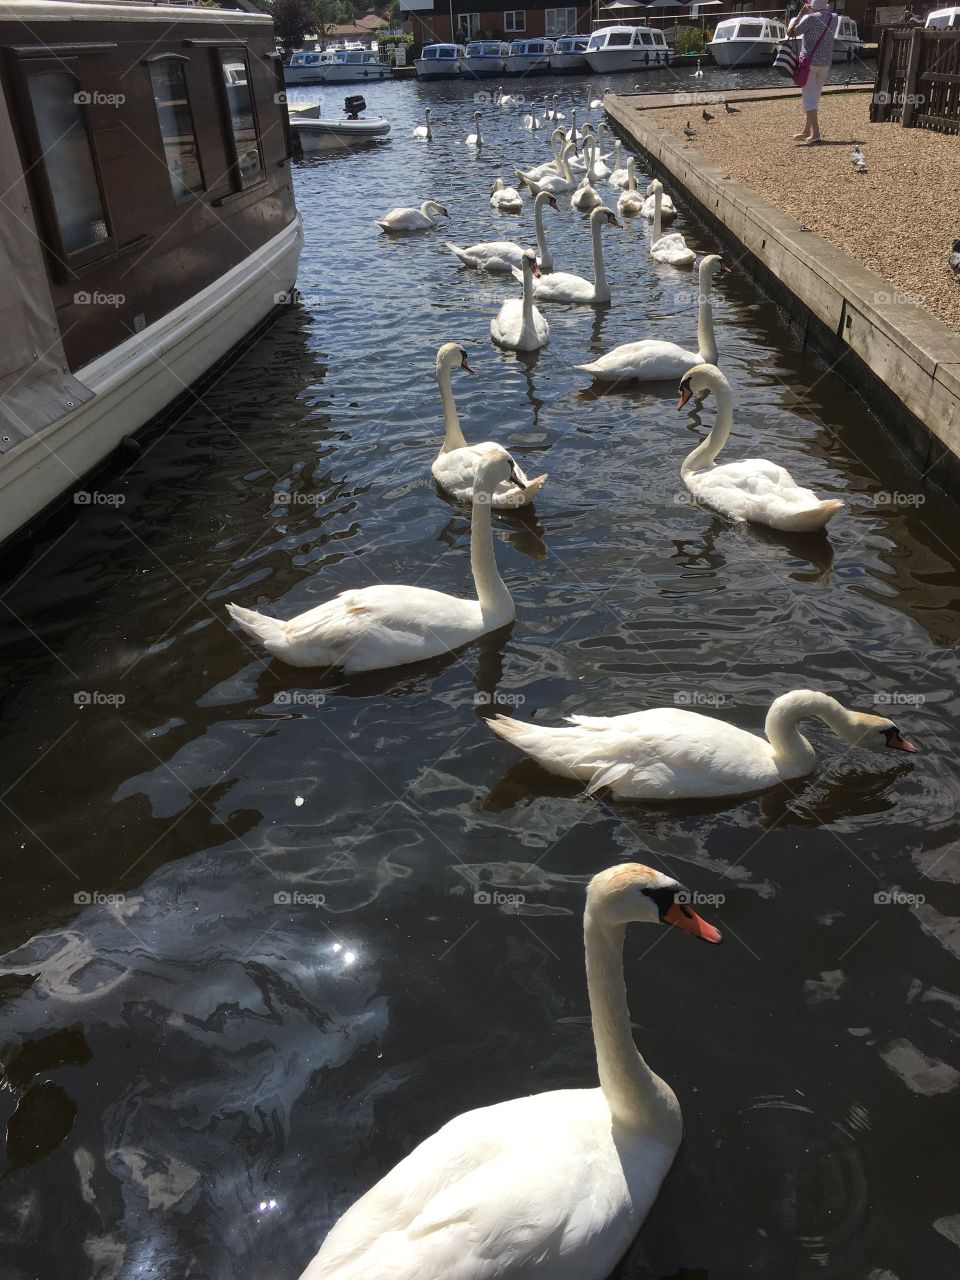 A crowd of swans